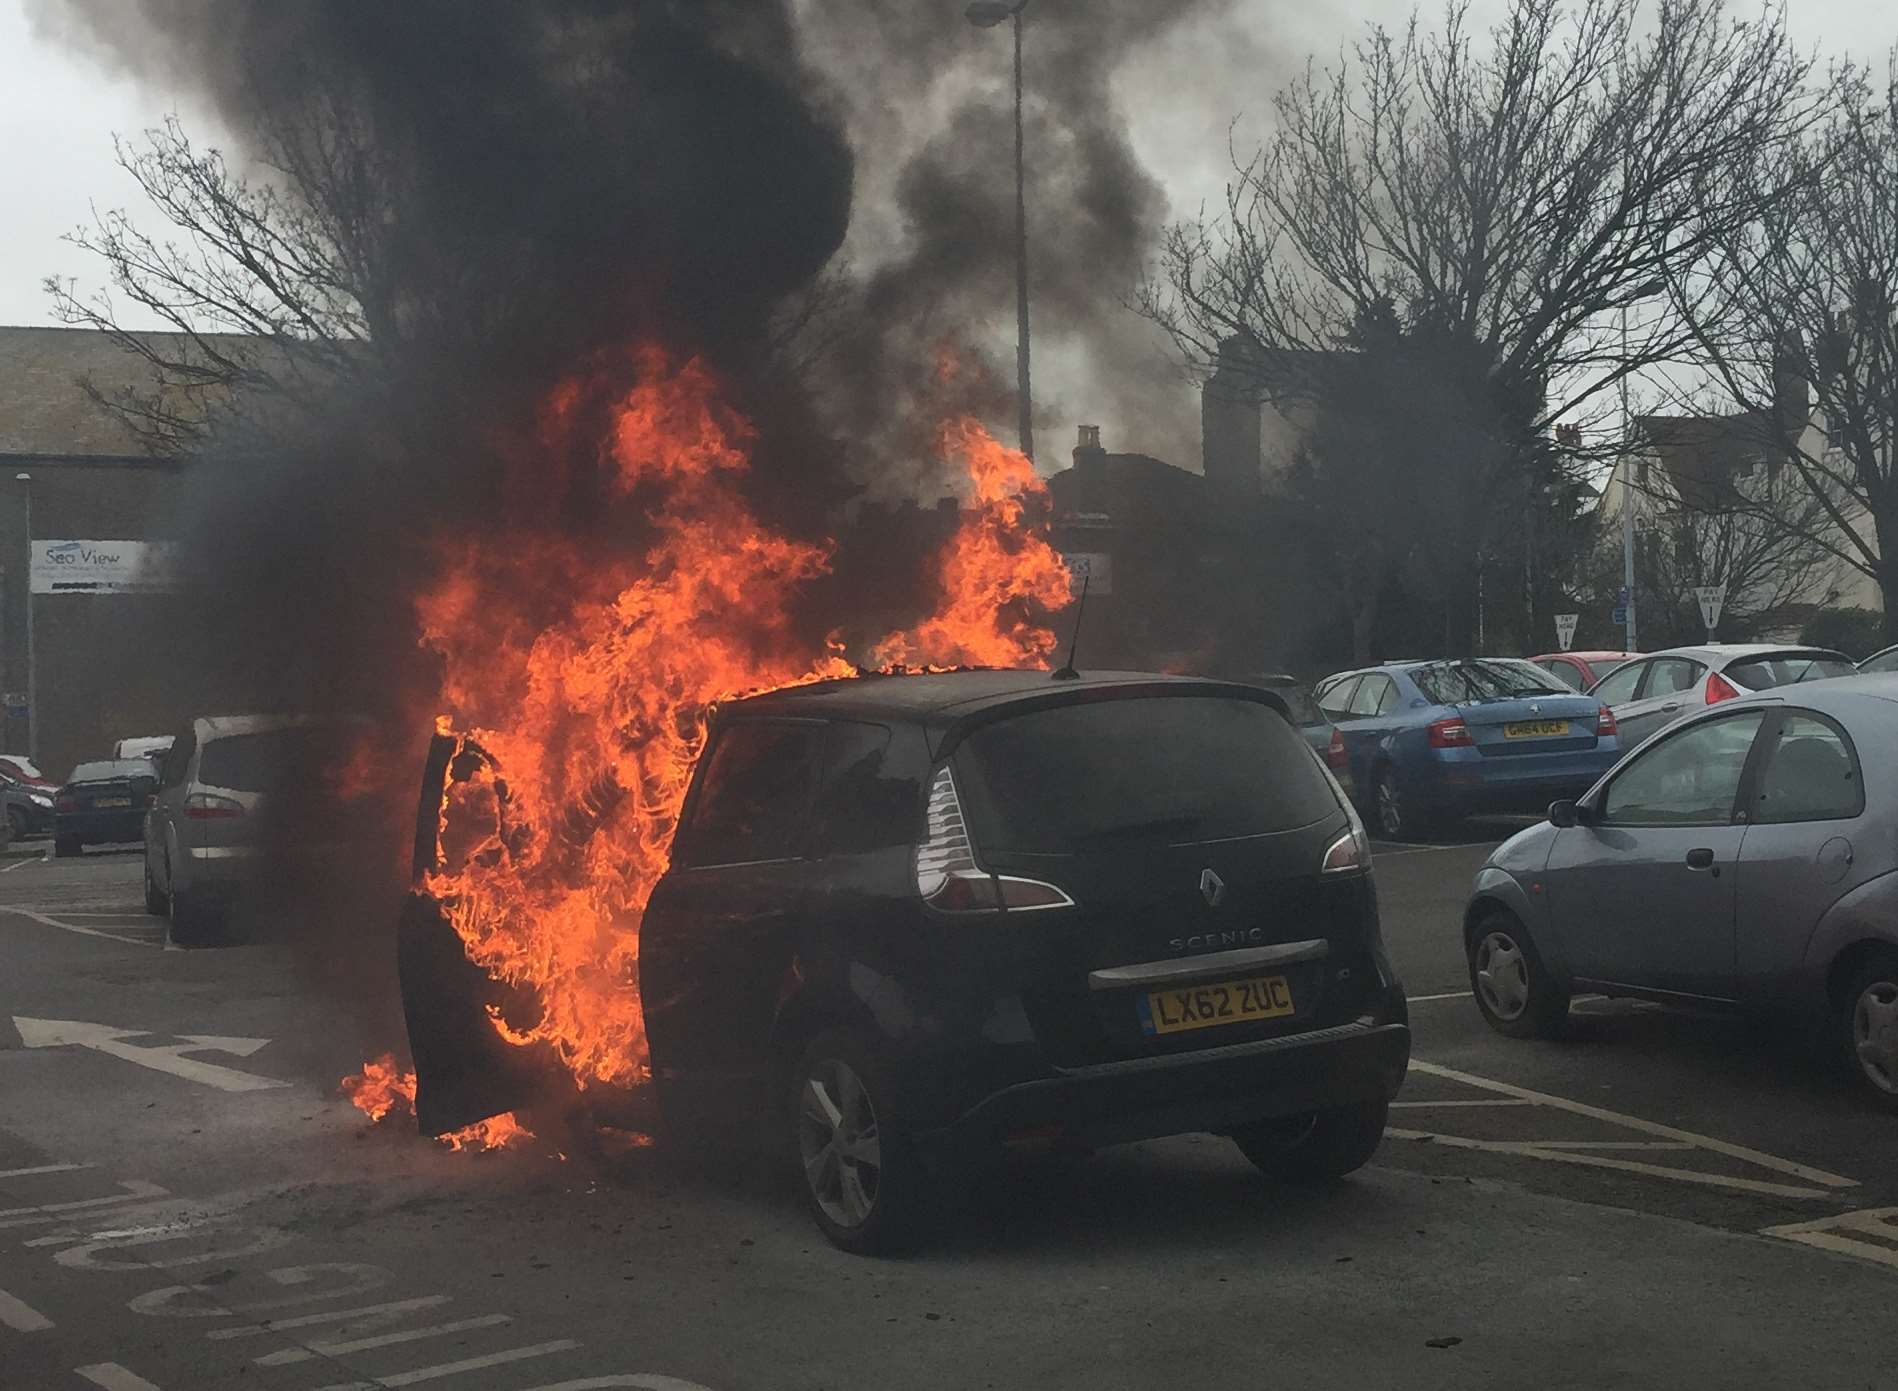 The car was engulfed in flames